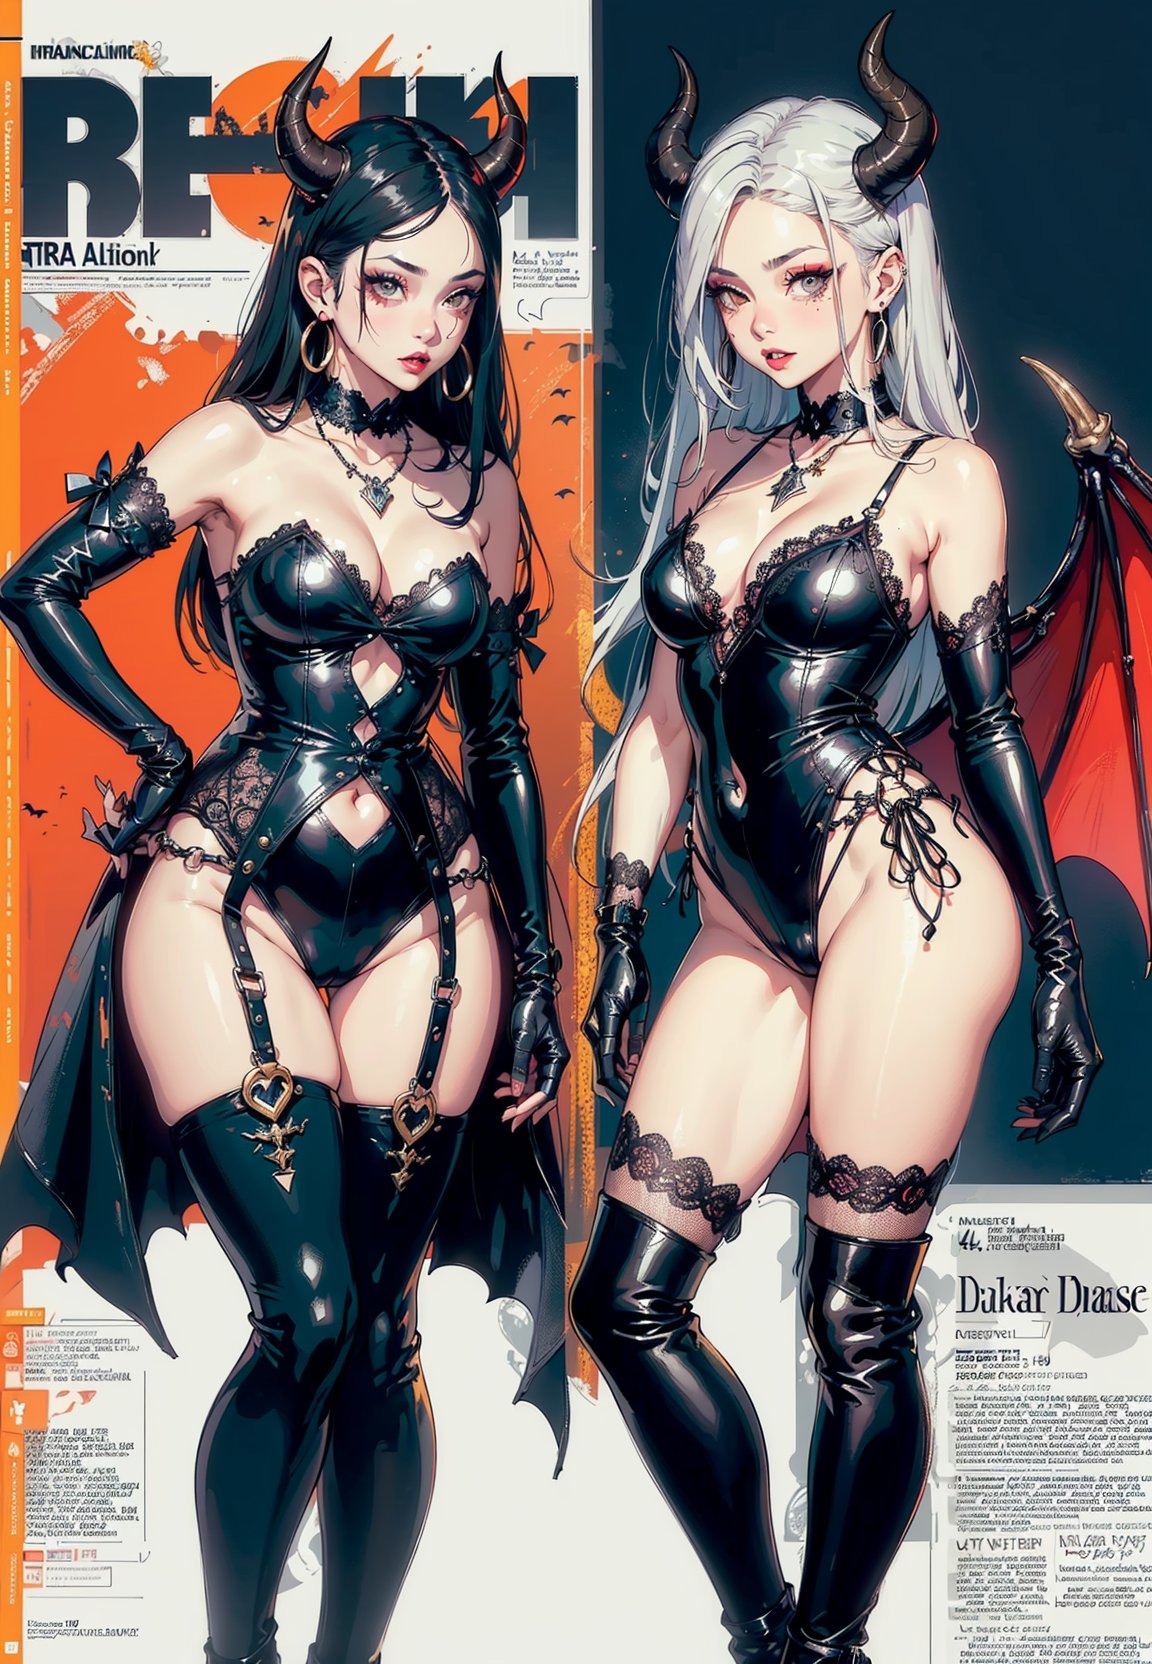 (masterpiece:1.4, best quality:1.4), illustrations, (group:1.5), (original), (very detailed wallpaper), photographic reality, (ultra detailed:1.4), (super-complex detail), multiple characters, (cosplay:1.5), demon-themed, (fashion magazine cover), (dynamic poses:1.2), (red|black hair), (demonic horns:1.3), (captivating gaze:1.1), (sultry smiles:1.2), (costume variations:1.4), (tattered|elaborate:1.1) clothing, (leather|lace:1.3) fabrics, (vibrant colors:1.4), (silver|gold:1.2) accents, (intricate patterns:1.3), (bat|dragon:1.2) wings, (tail accessories:1.1), (chokers|necklaces:1.1), (oversized|delicate:1.2) earrings, (fashion-forward:1.5) footwear, (knee-high boots|stiletto heels:1.0), (fitted gloves|armbands:1.0), (demon-inspired:1.3) makeup, (bold|expressive:1.2) hairstyles, (catchy headlines:1.5), (magazine title:1.3), (modern|trendy:1.4) style, (fashion|lifestyle:1.1) focus, (attention-grabbing:1.2) text, (dynamic|colorful:1.1) background.